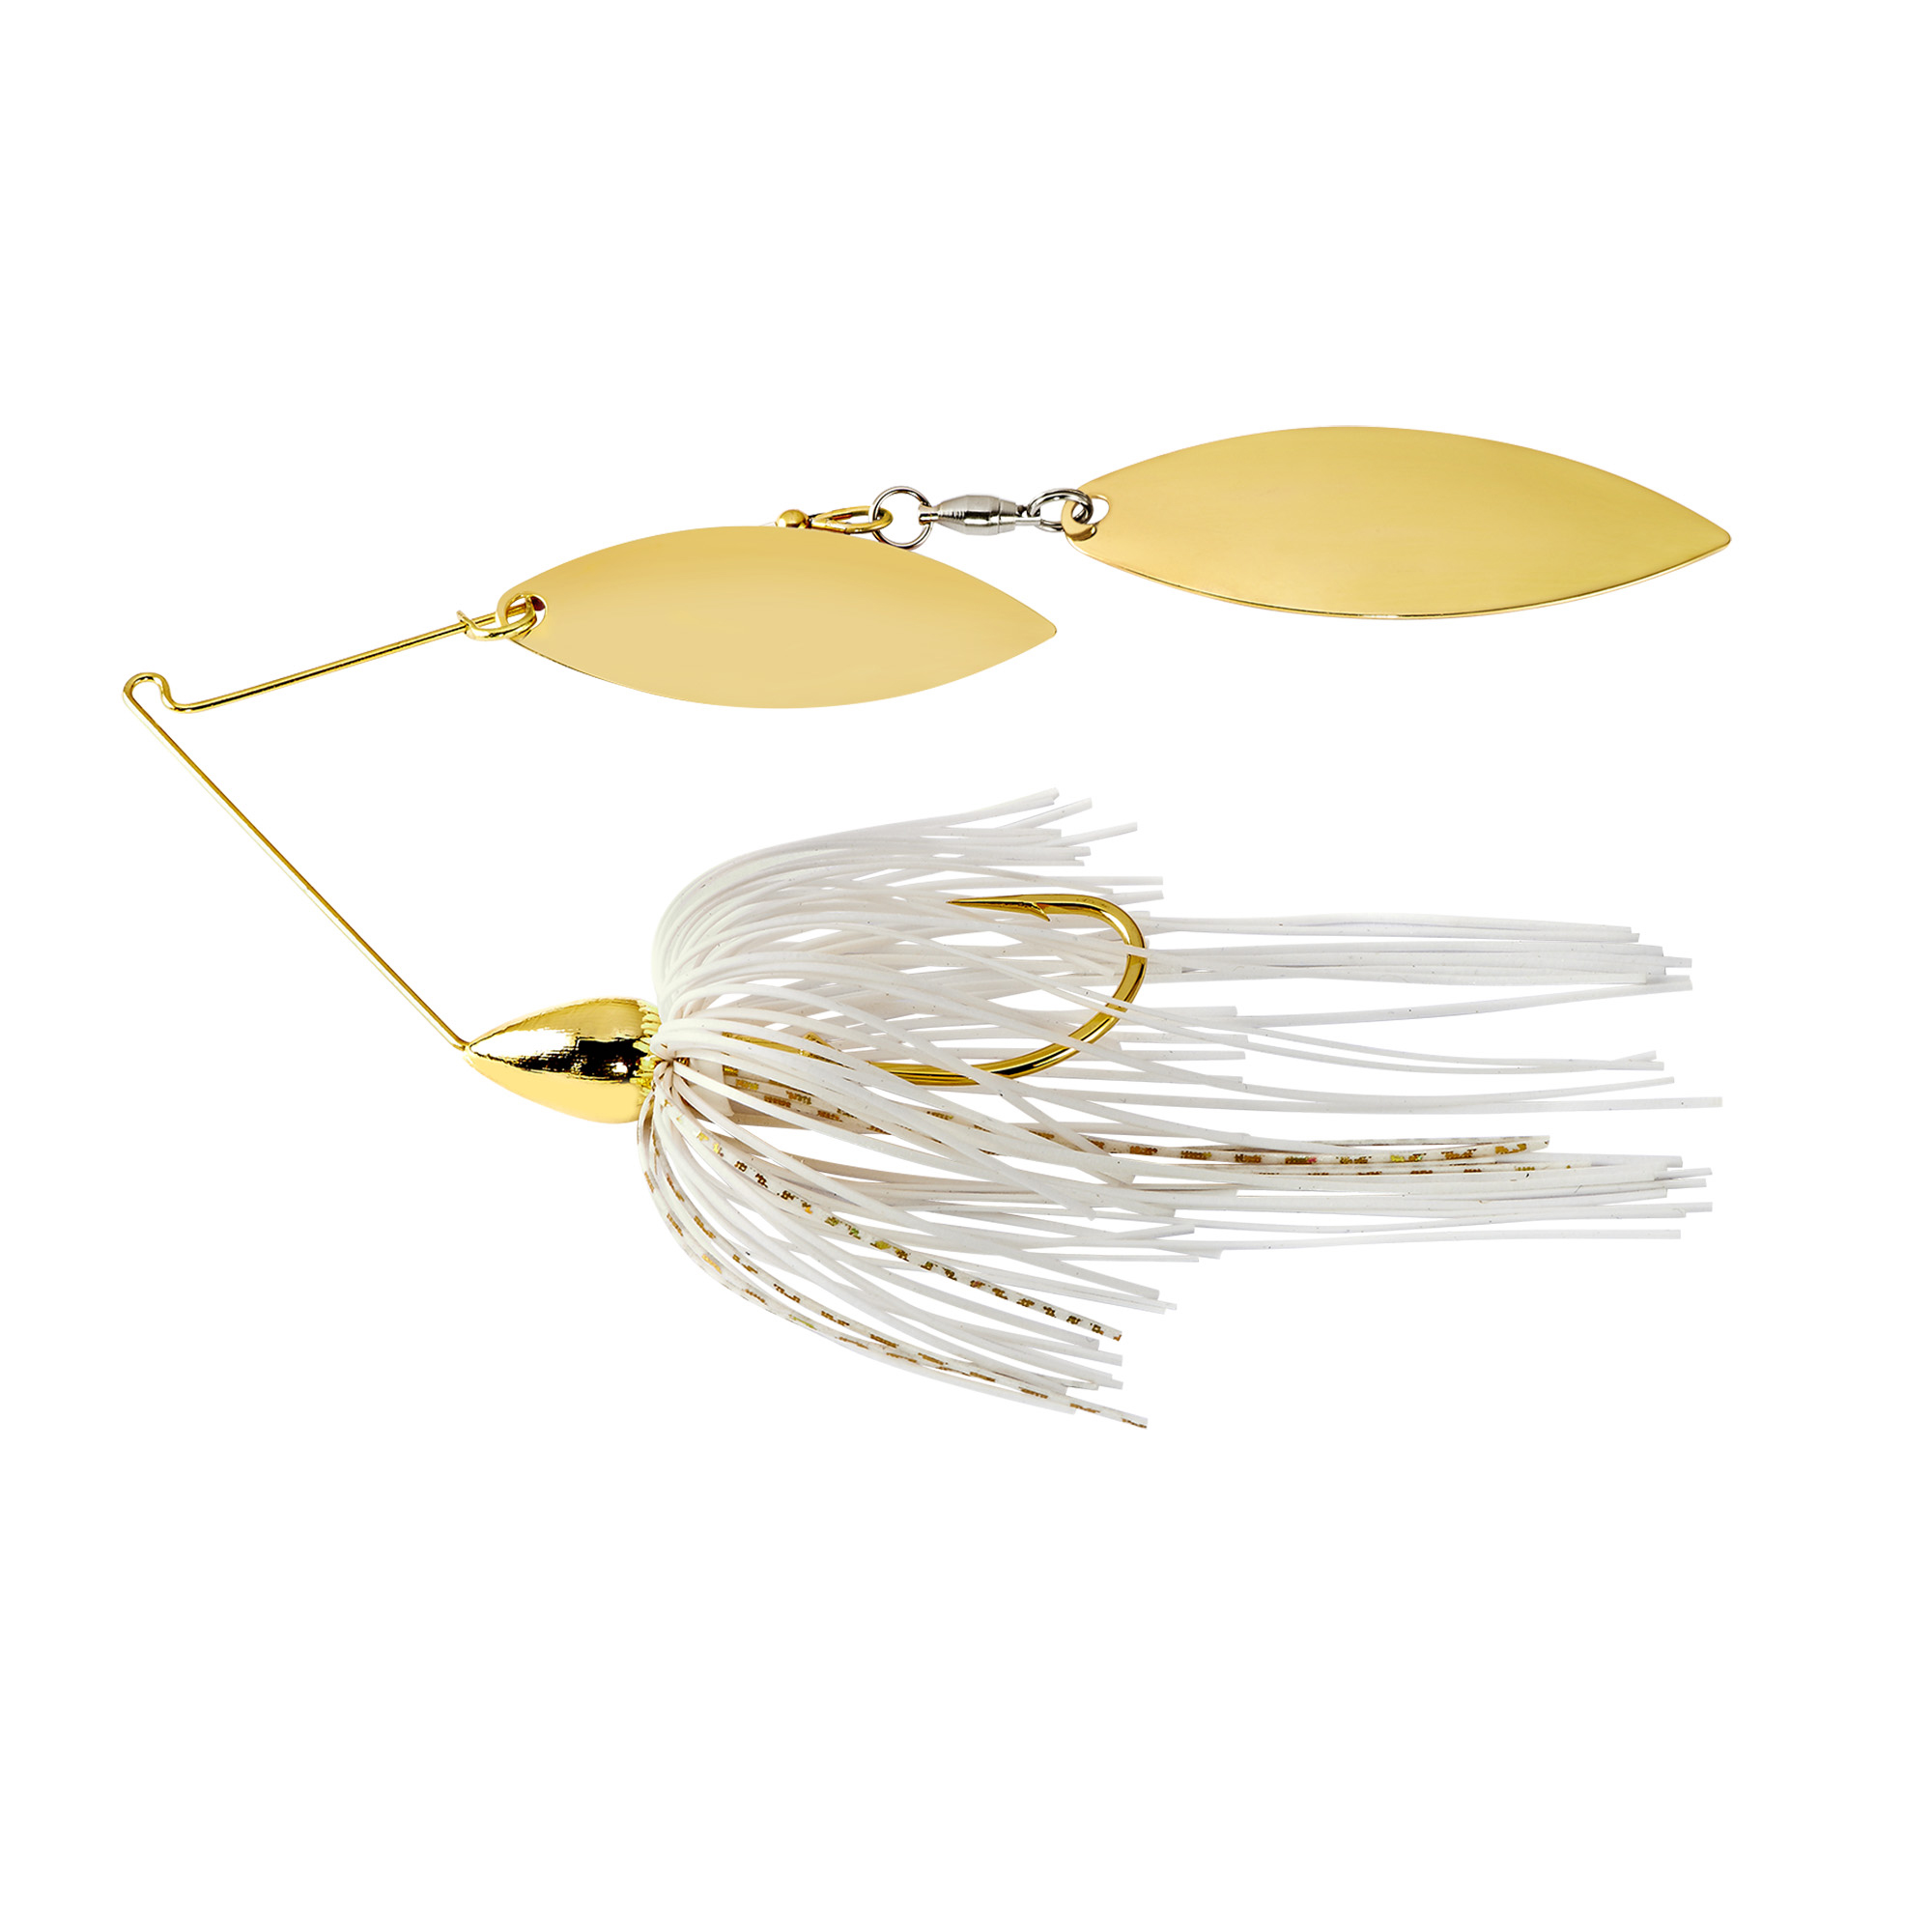 War Eagle Gold Spinnerbait Colorado/Willow